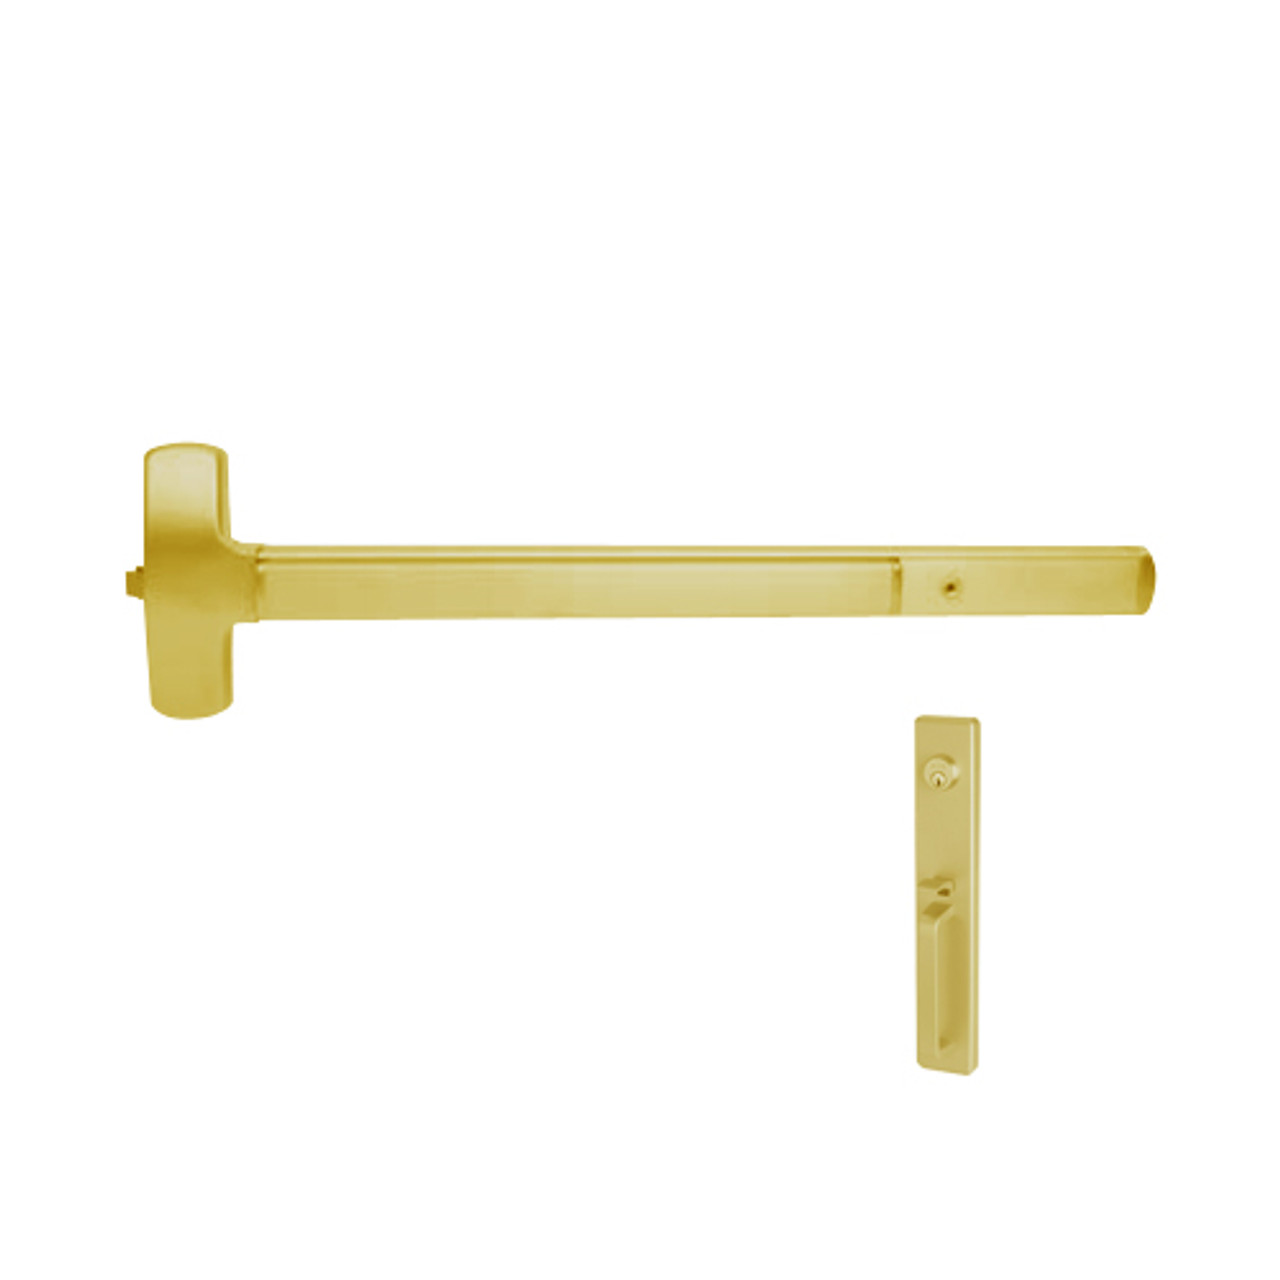 25-R-TP-US4-4 Falcon Exit Device in Satin Brass